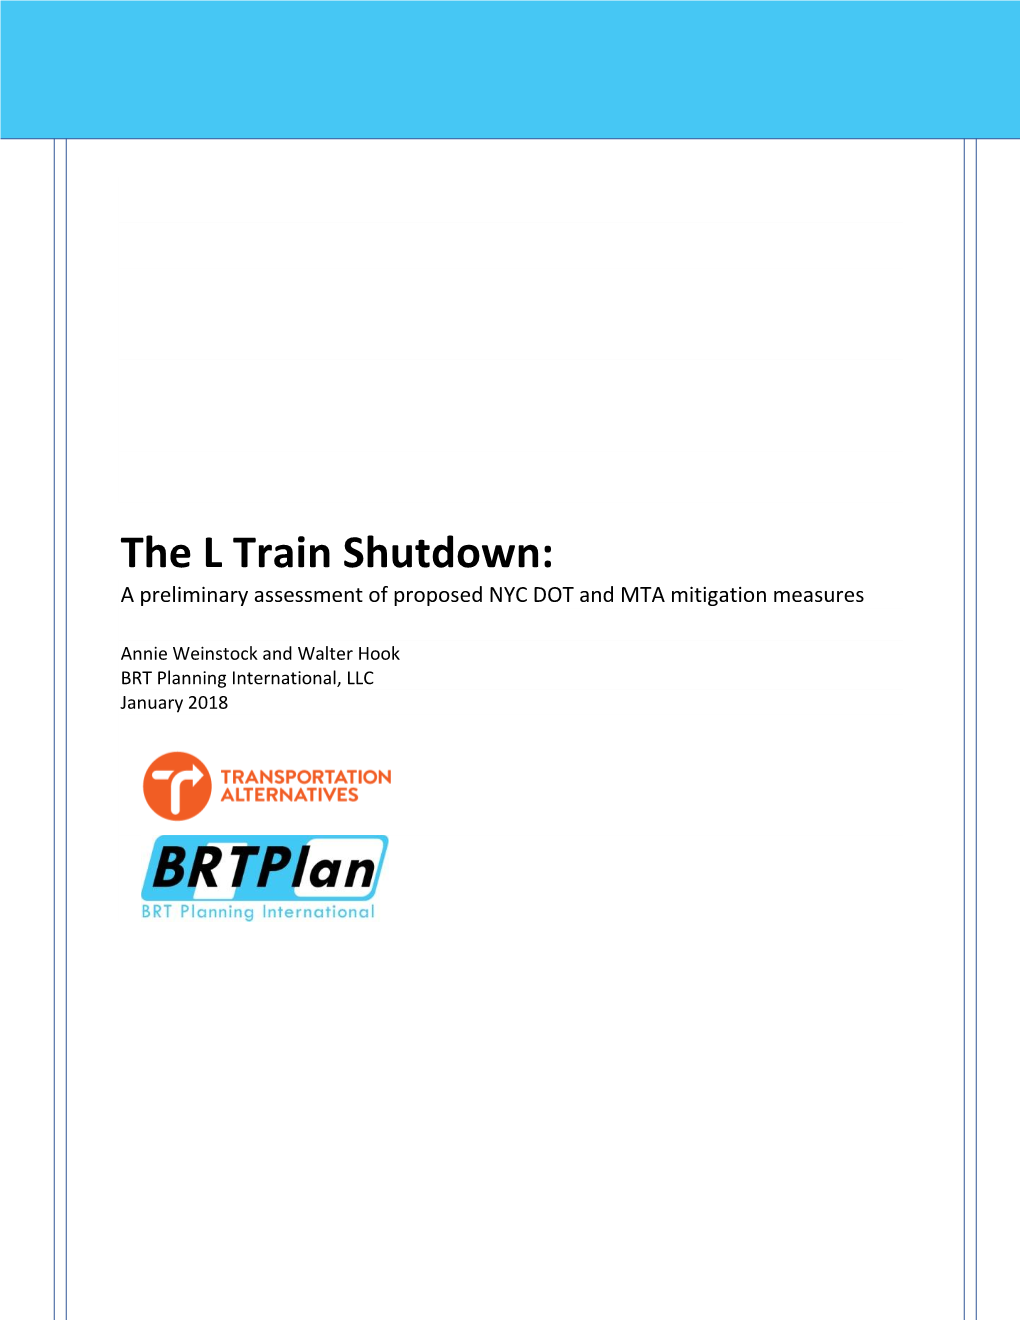 The L Train Shutdown: a Preliminary Assessment of Proposed NYC DOT and MTA Mitigation Measures